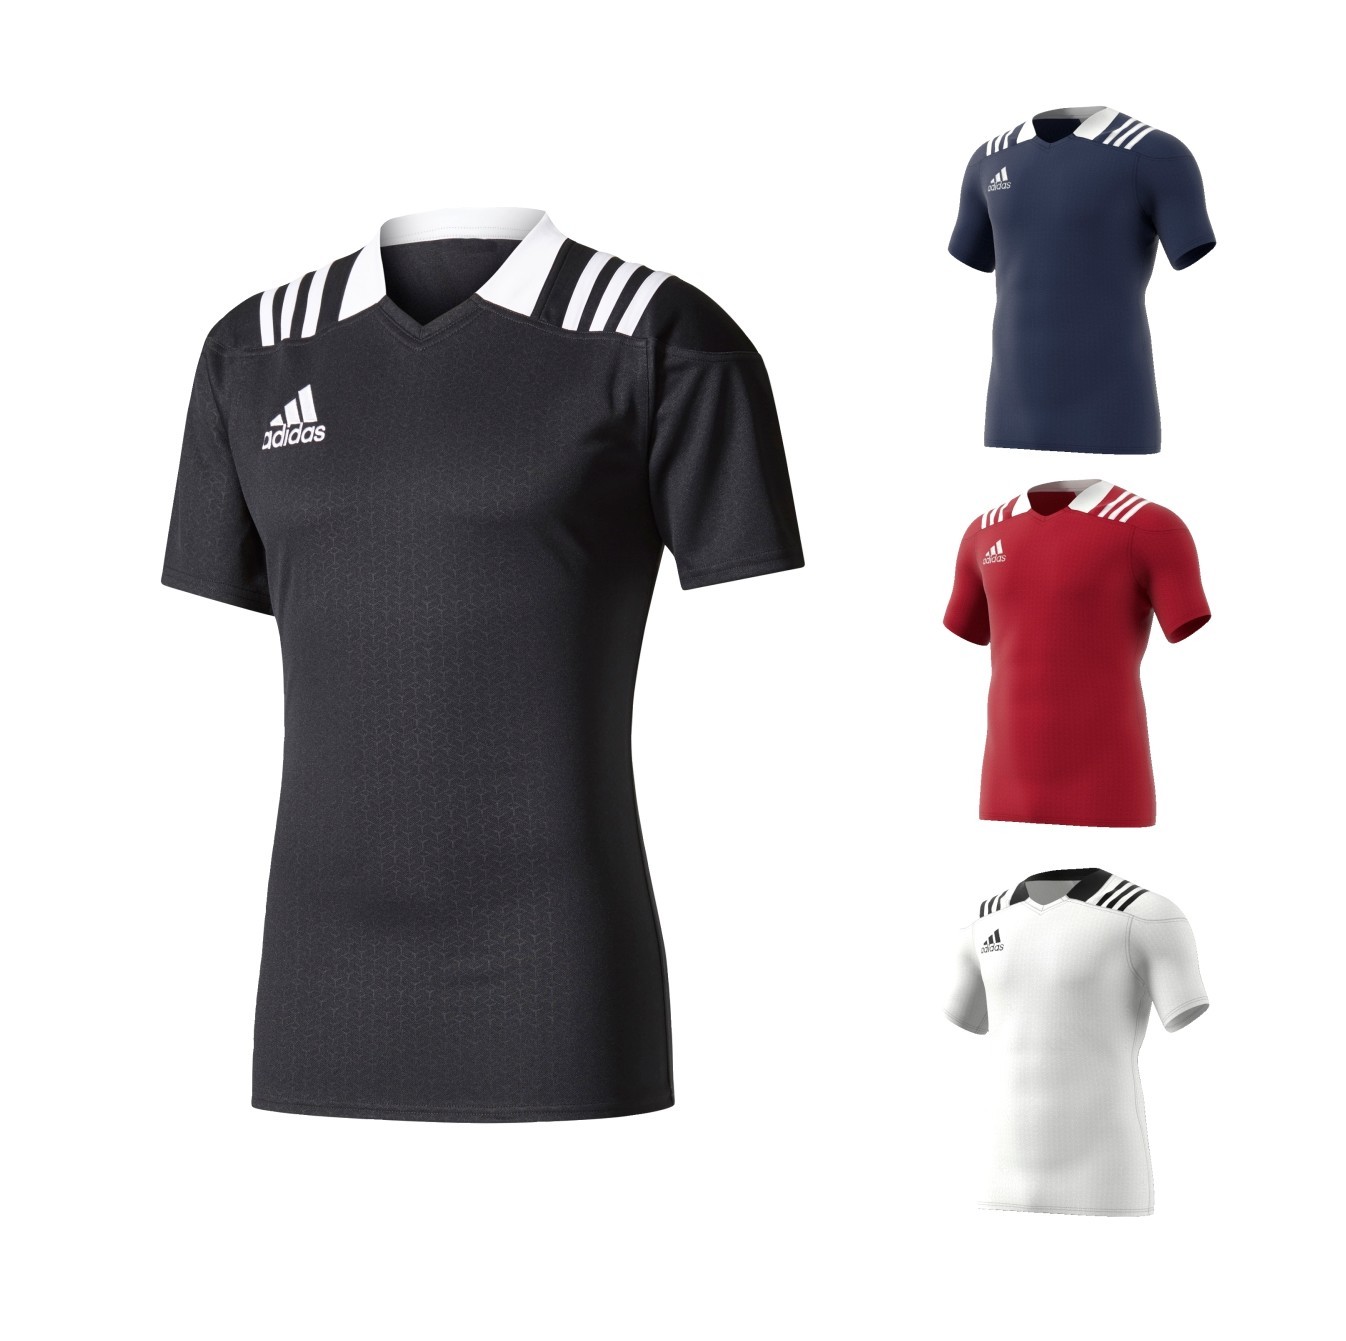 maillot rugby adidas